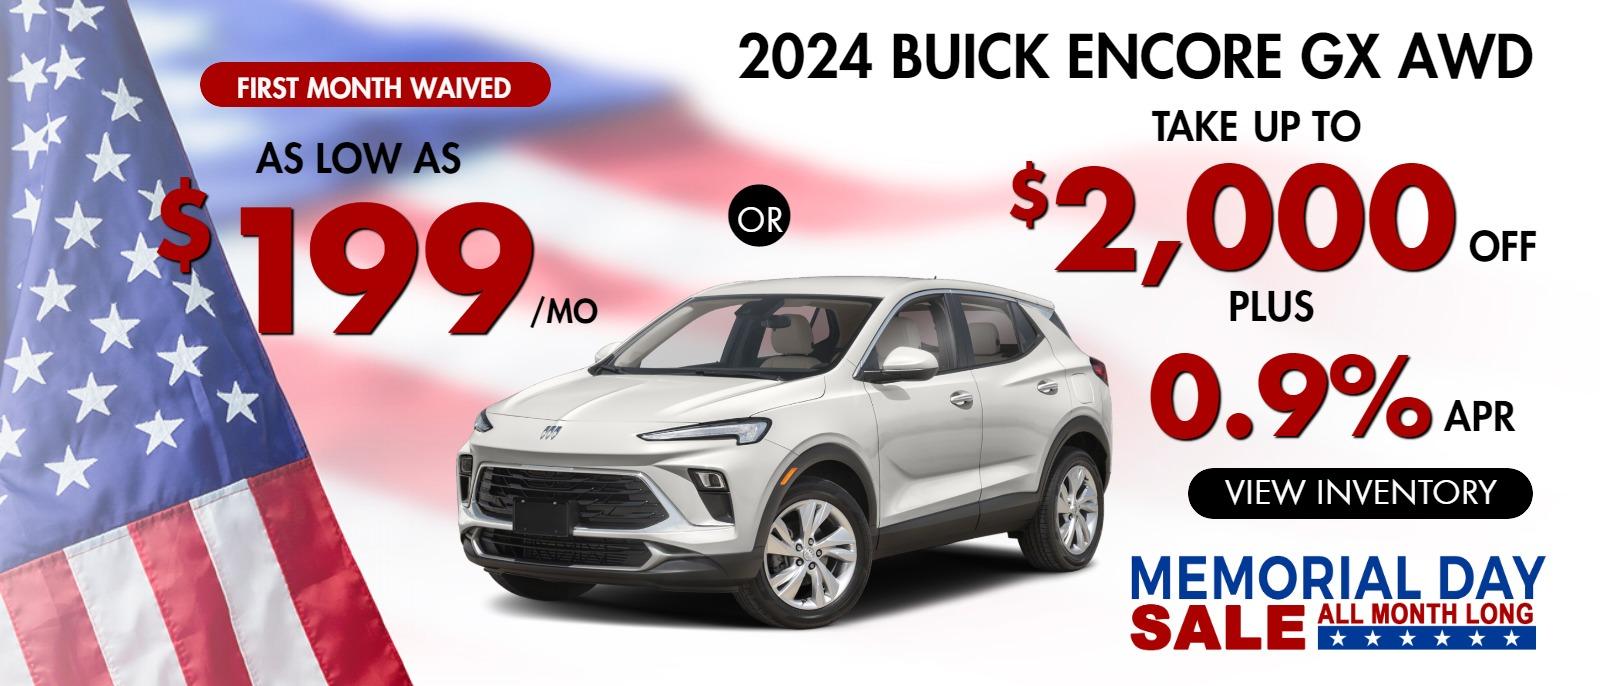 2024 Encore GX AWD 
Stock B3806


take up to $2000 OFF & 0.9% finance

Or
AS LOW AS 
$199/mo (first month waived)